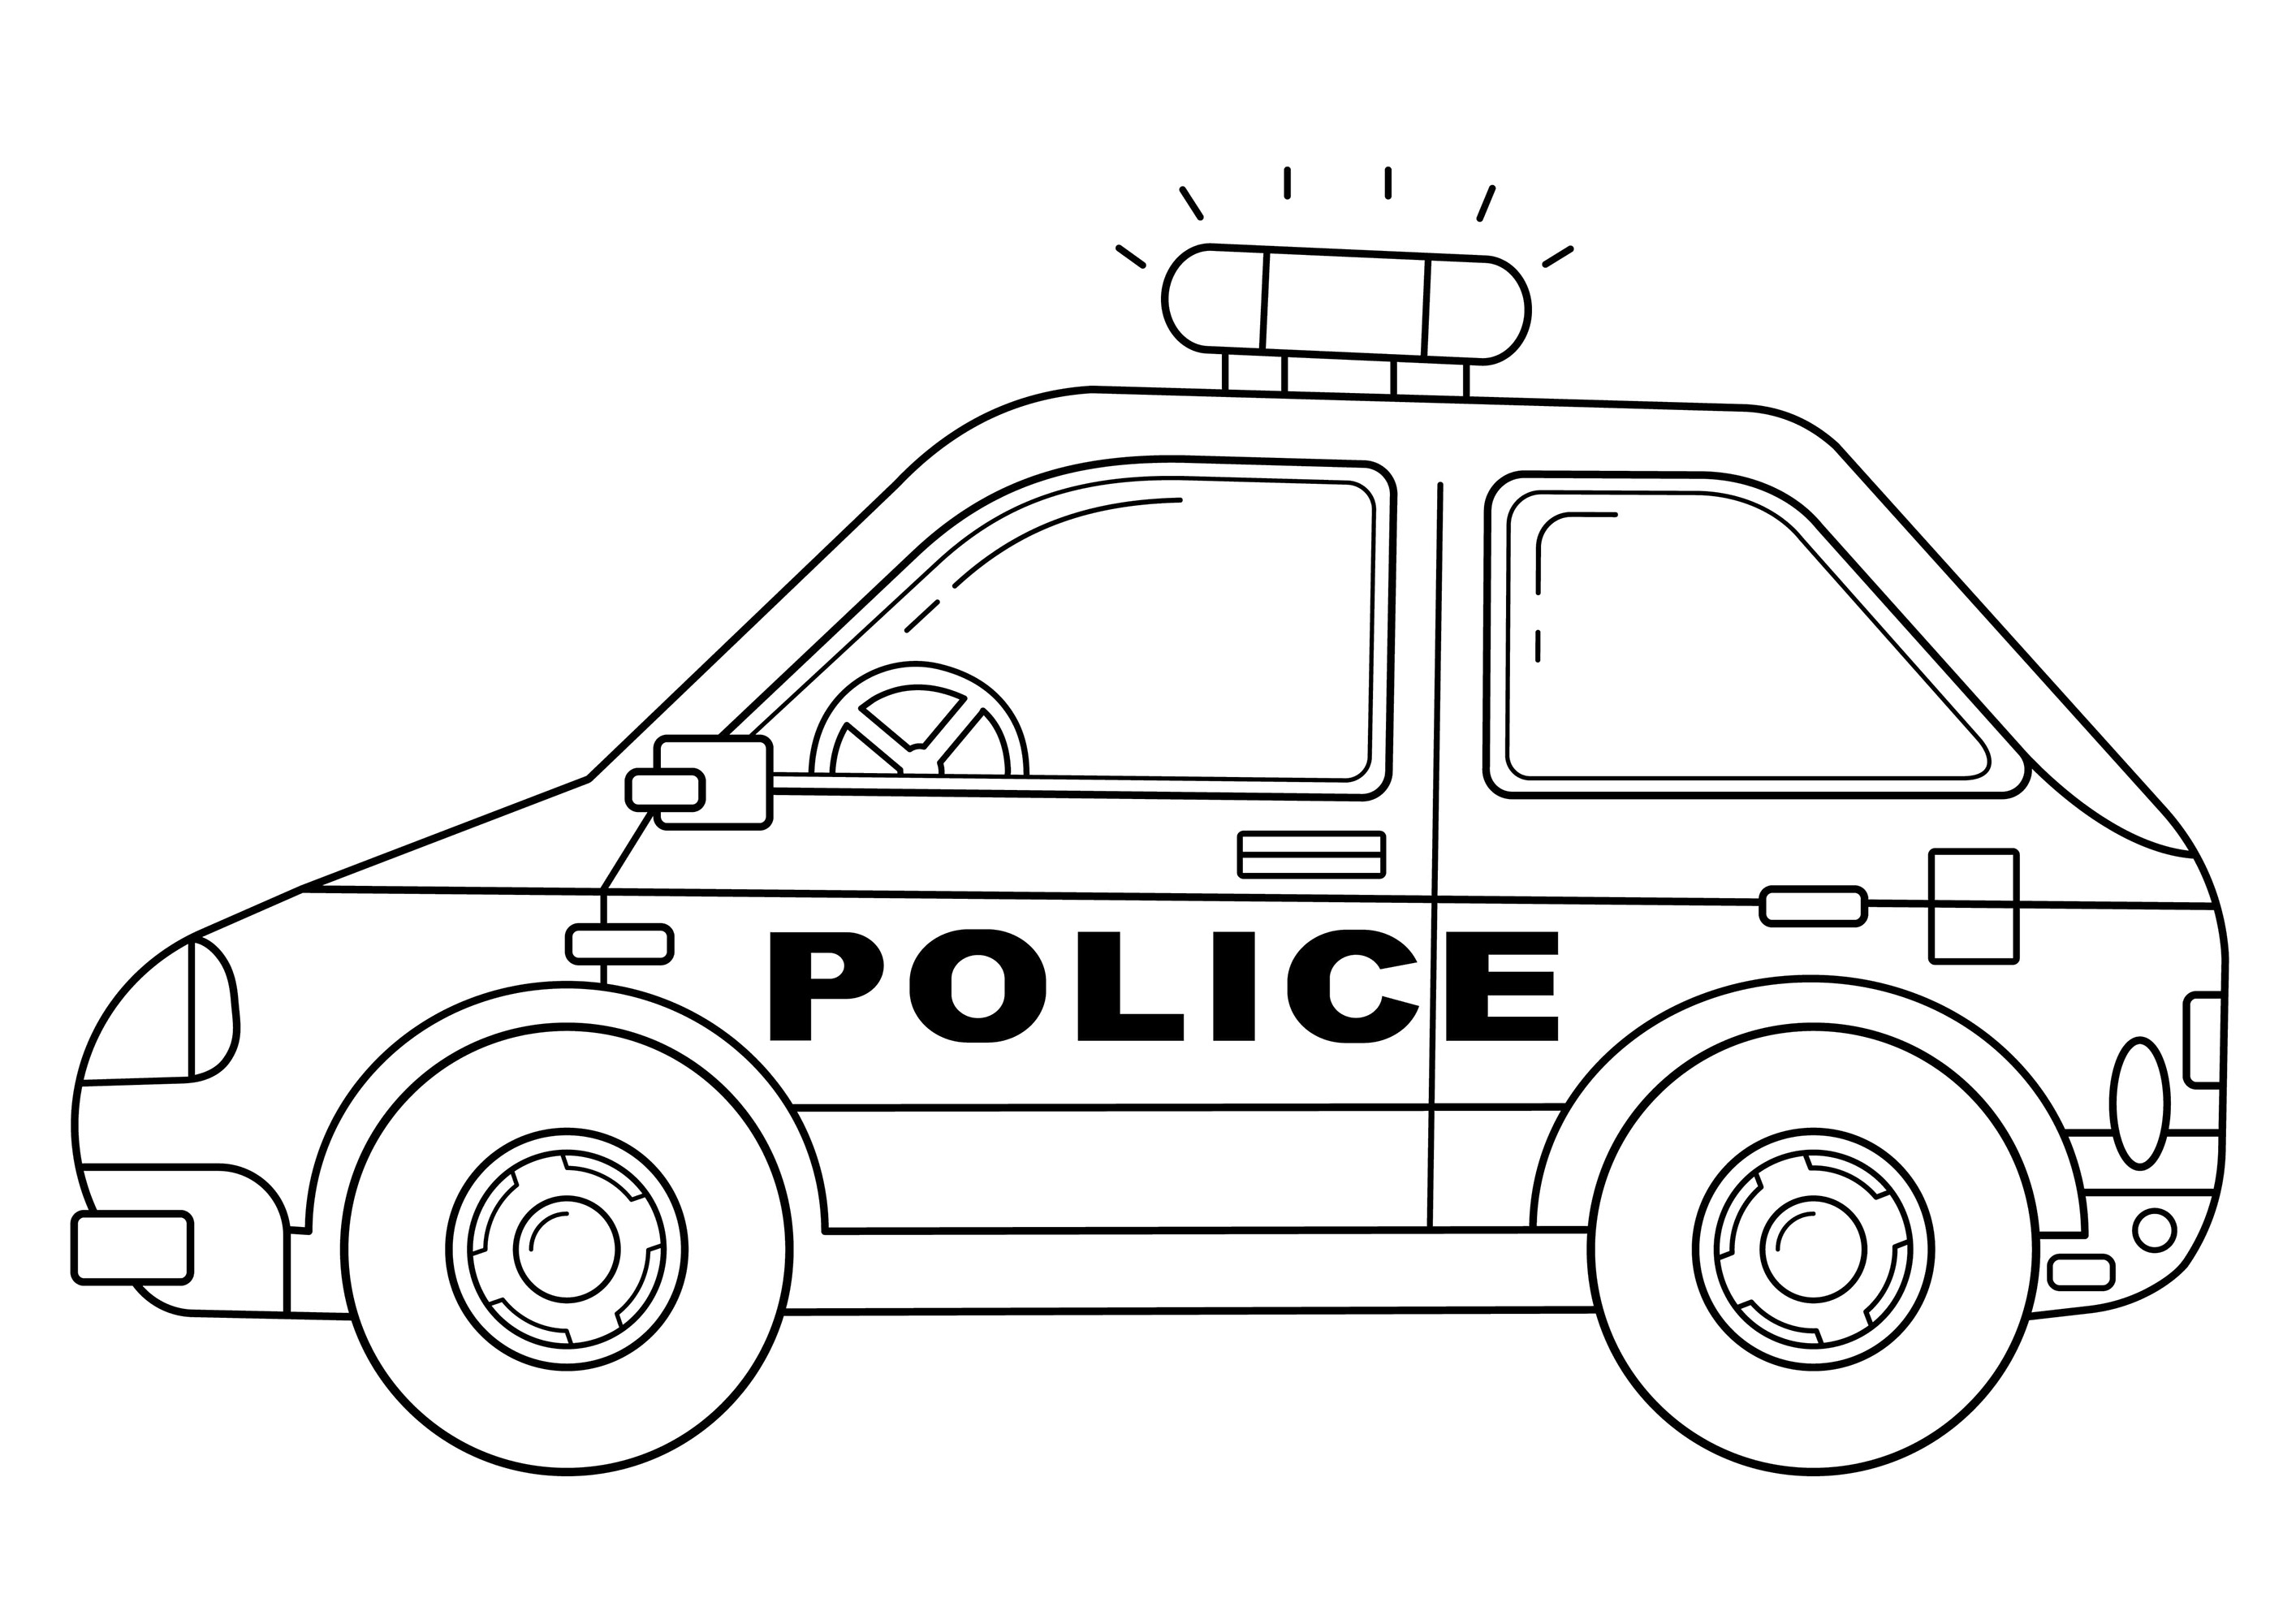 Police car in profile - Police Kids Coloring Pages